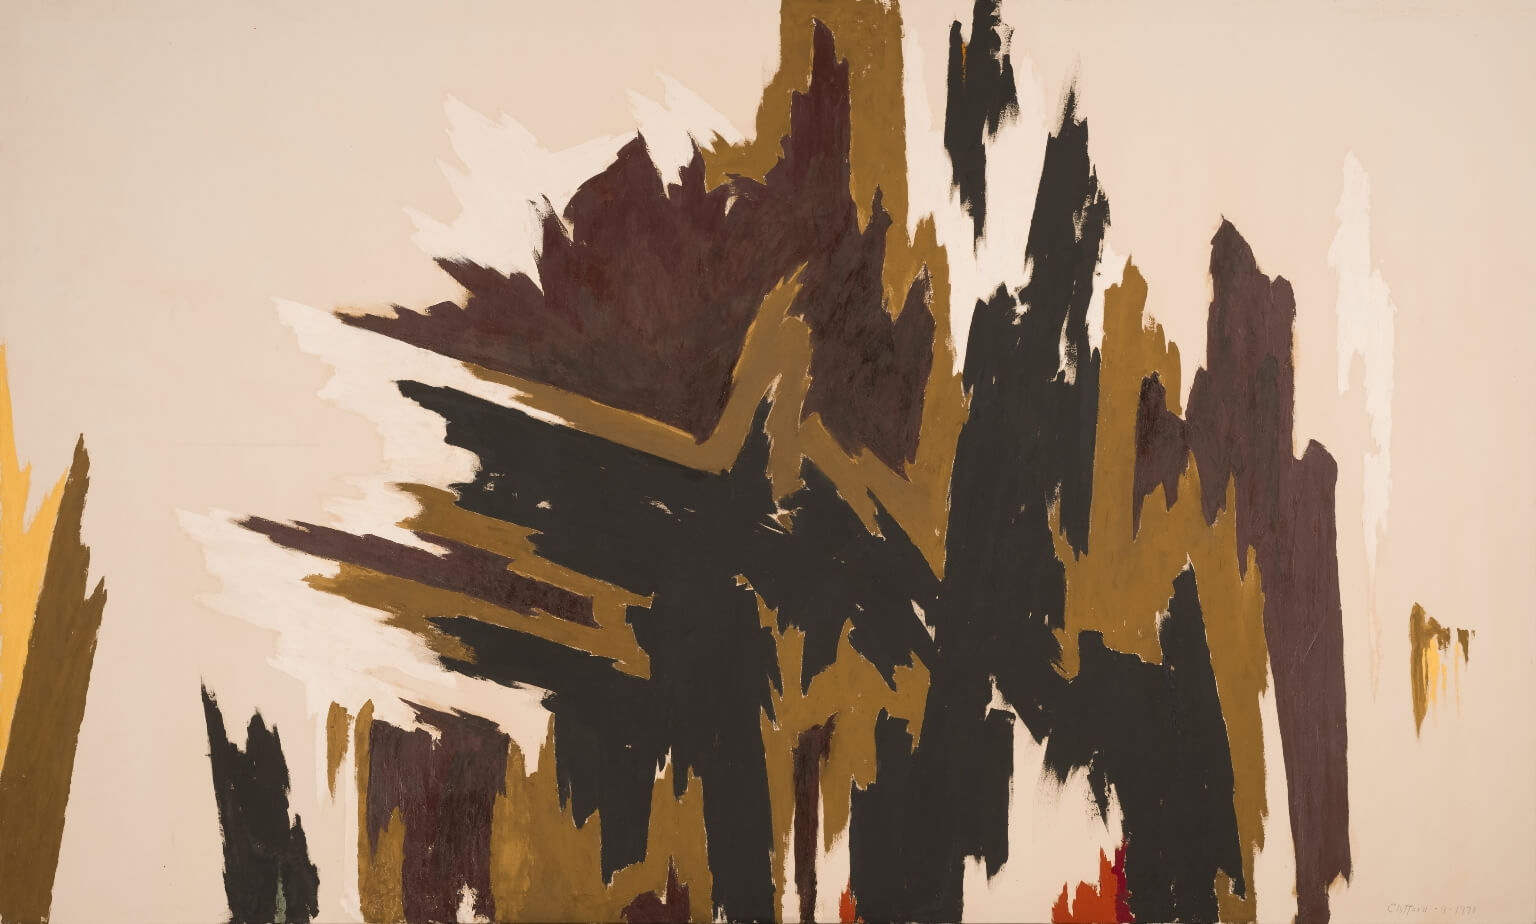 Abstract oil painting with bare canvas on the sides and a jabbed brown, tan, gold, and black figure that seems to be reaching out from the bottom, with highlights of other colors